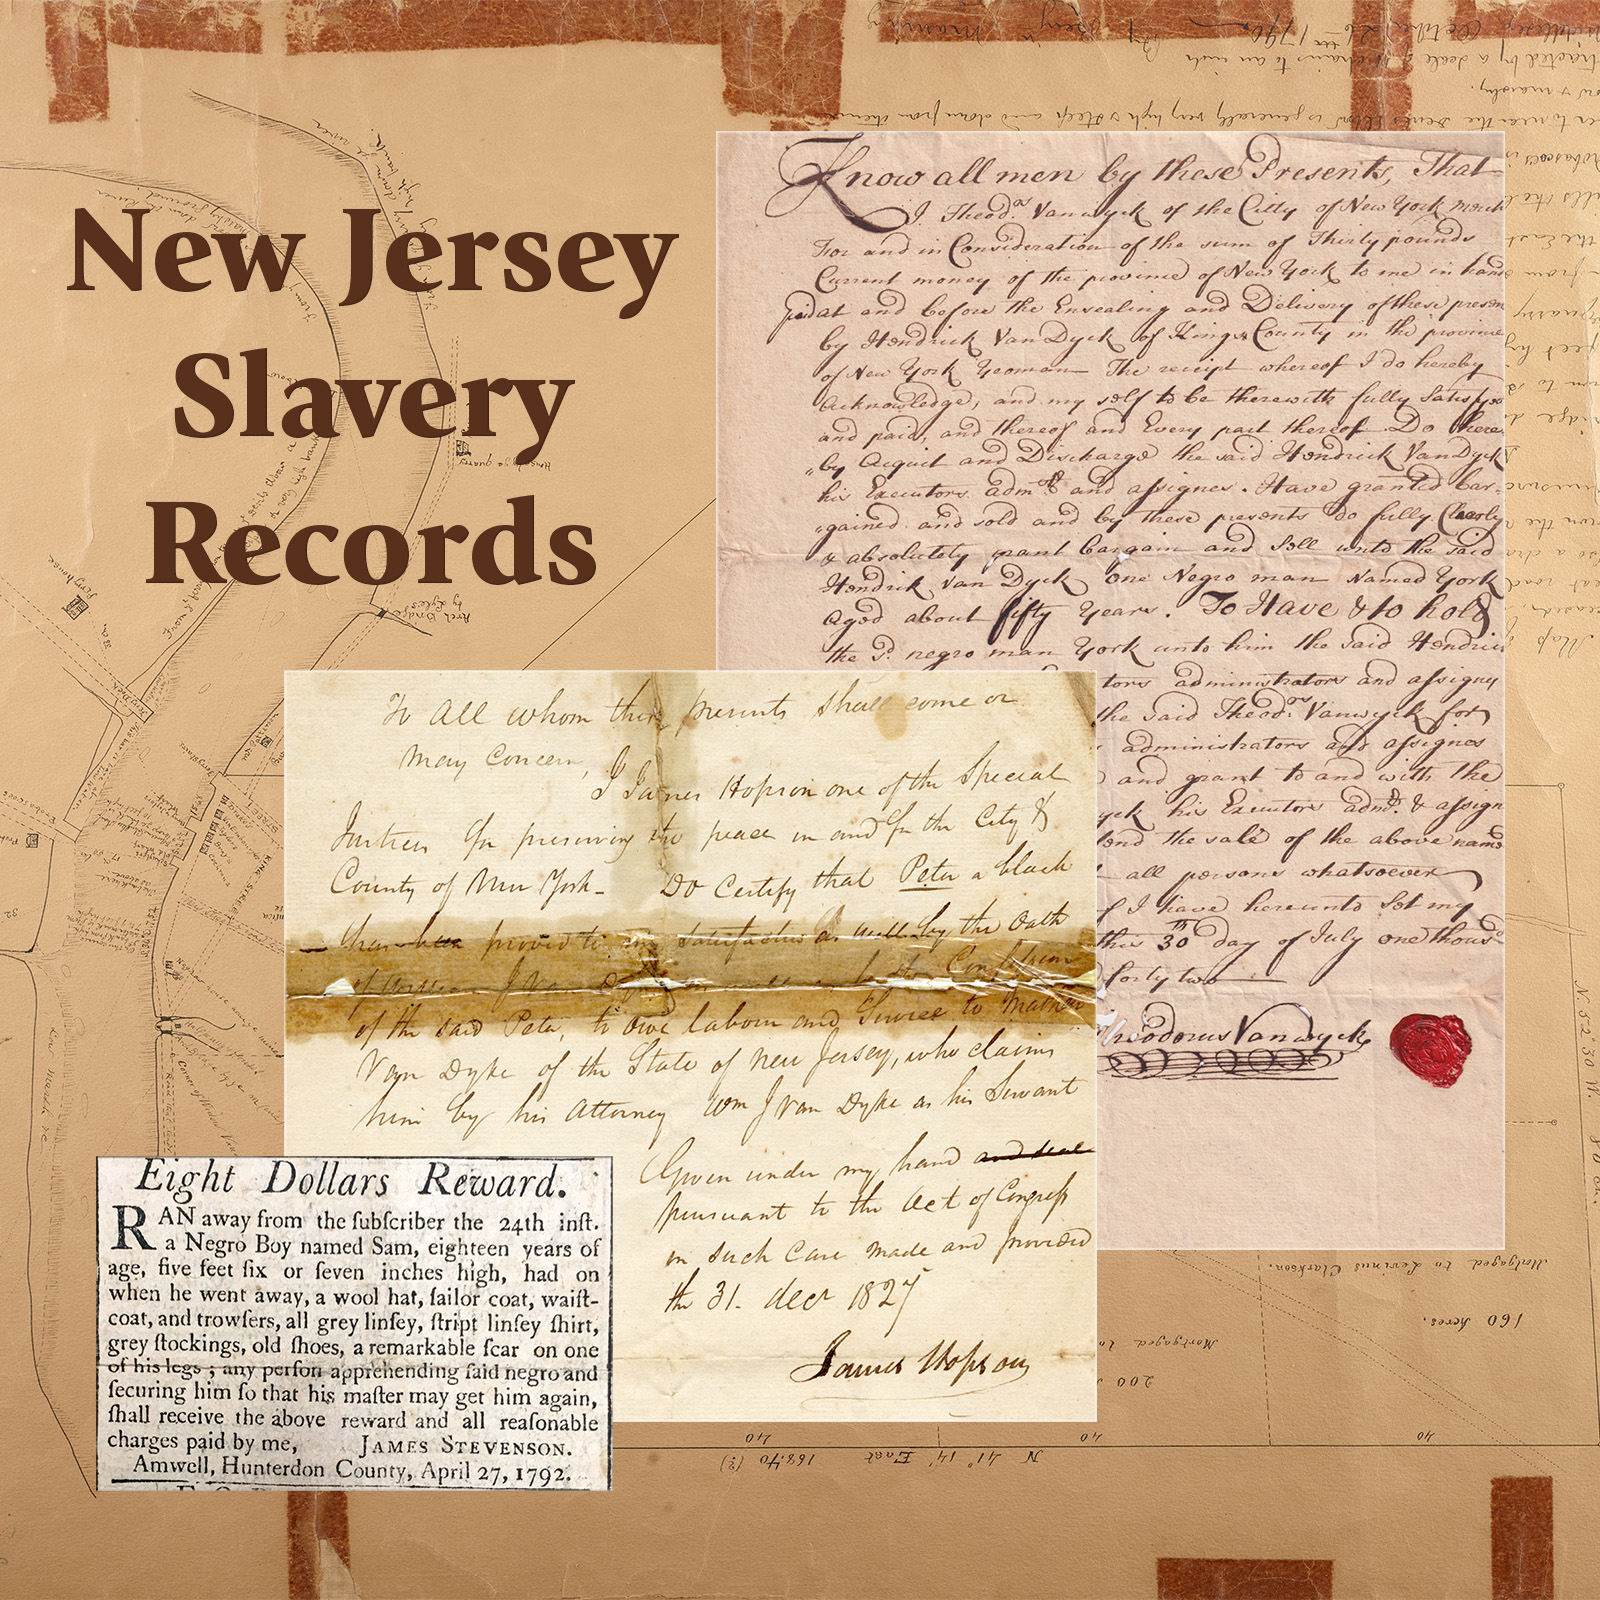 Image of three historical documents with a link to the New Jersey Slavery Records website